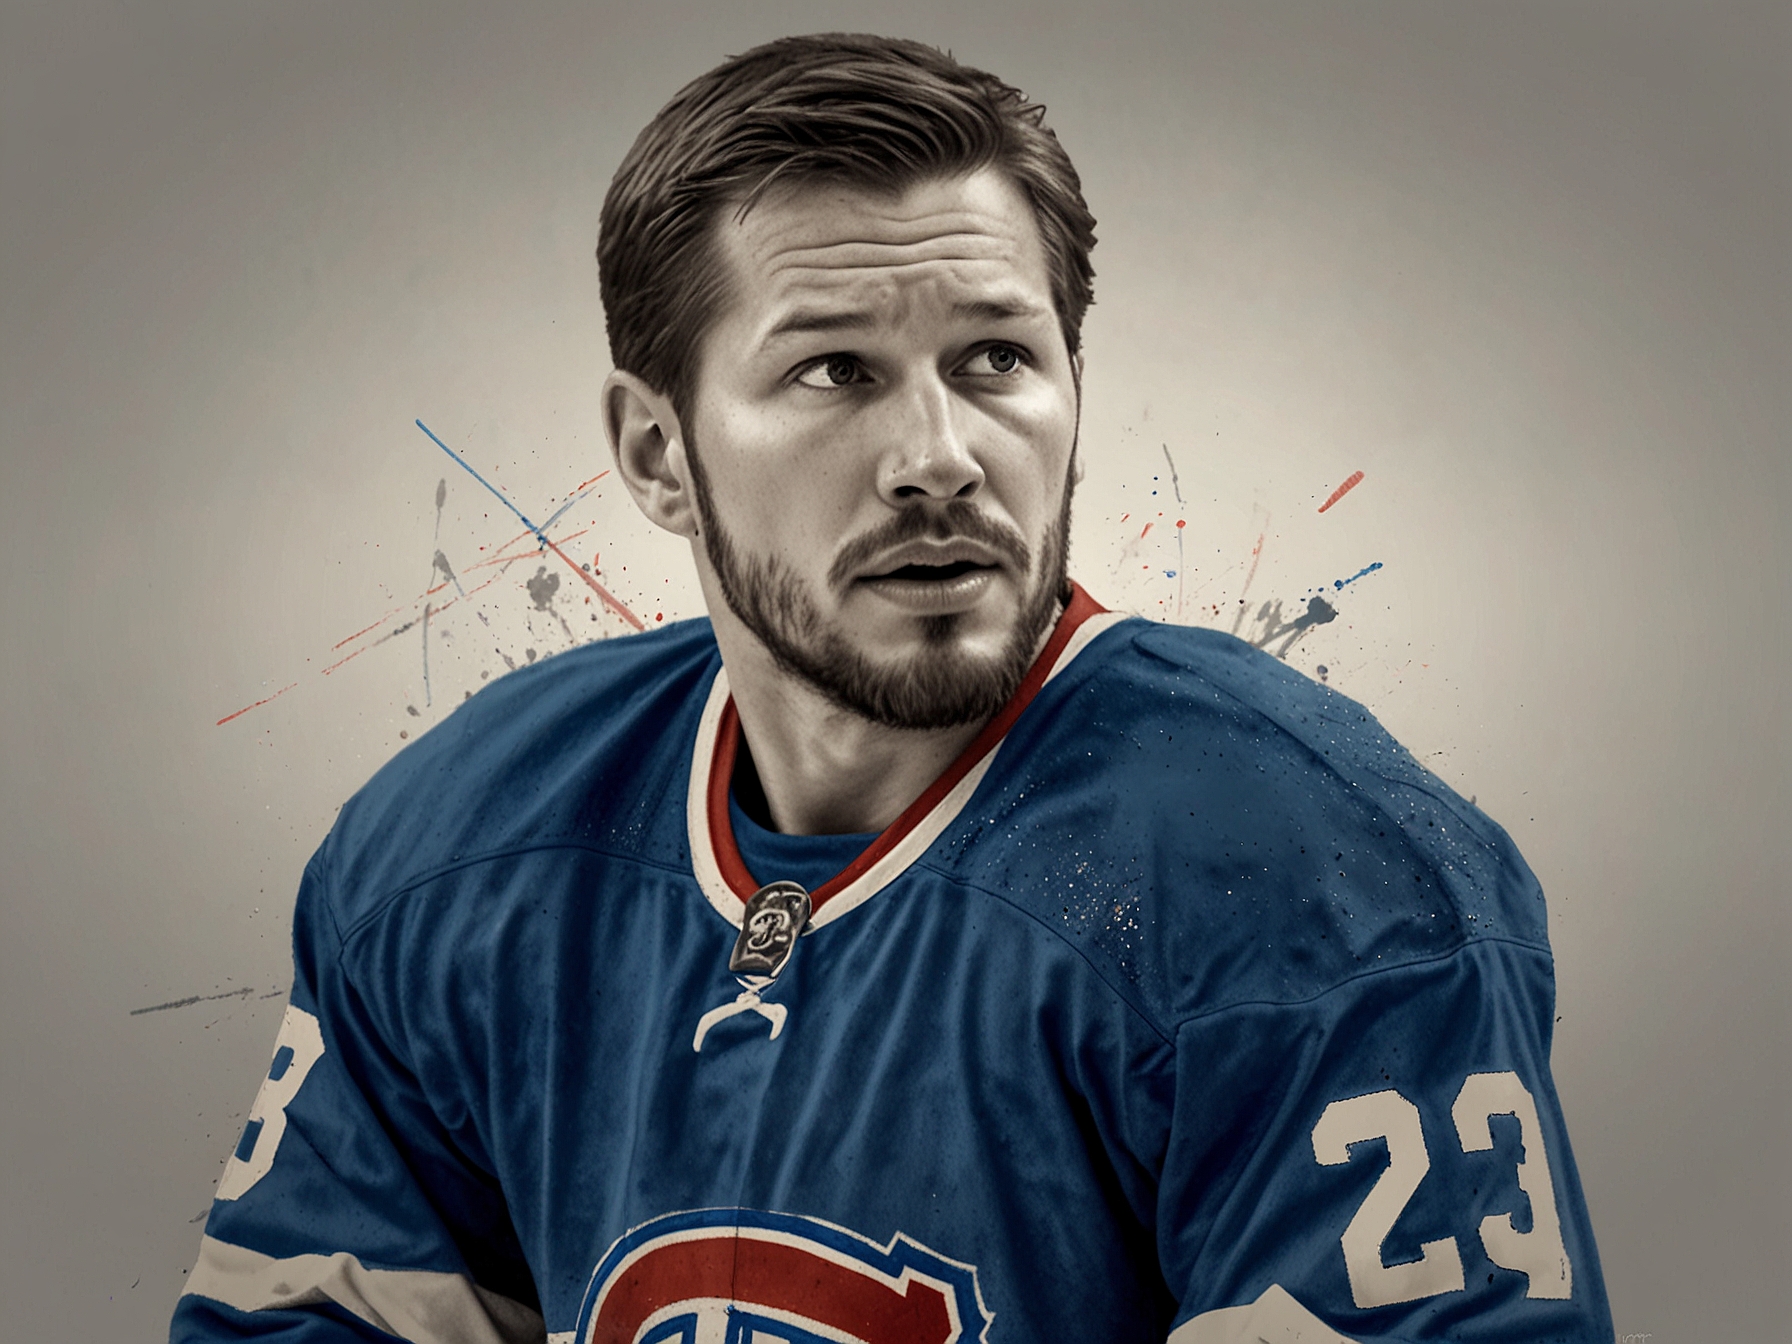 Image of David Jiricek, a highly regarded defenseman with physical play and two-way capability, potentially addressing the Canadiens' need for a stronger blue line.